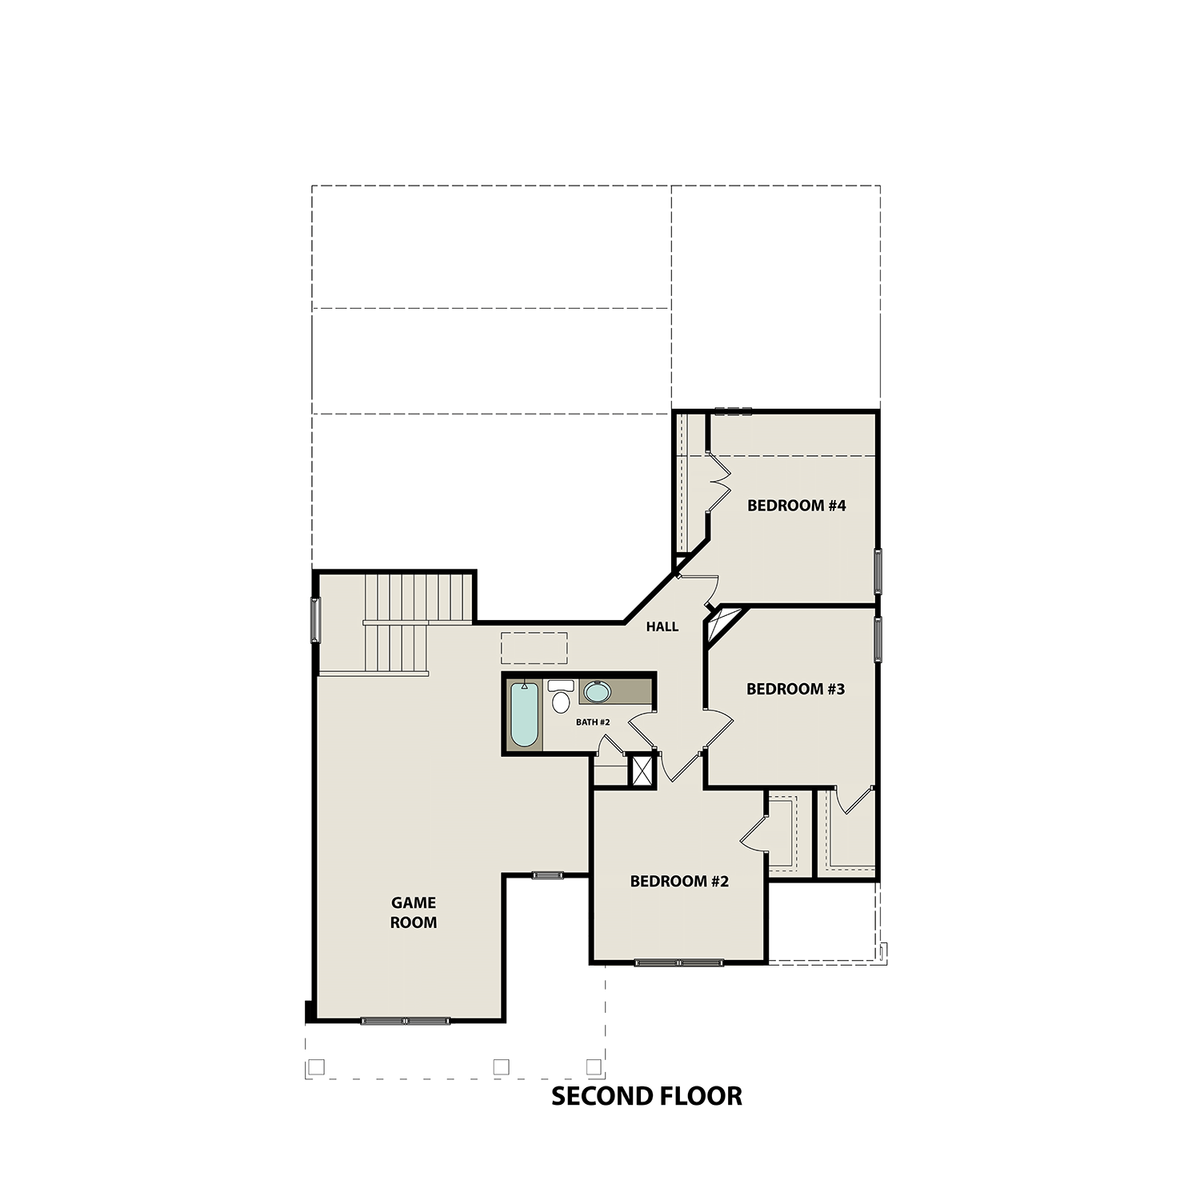 2 - The Ridgeport C with 3-Car Garage floor plan layout for 2239 Blue Heron Drive in Davidson Homes' Rivers Edge community.